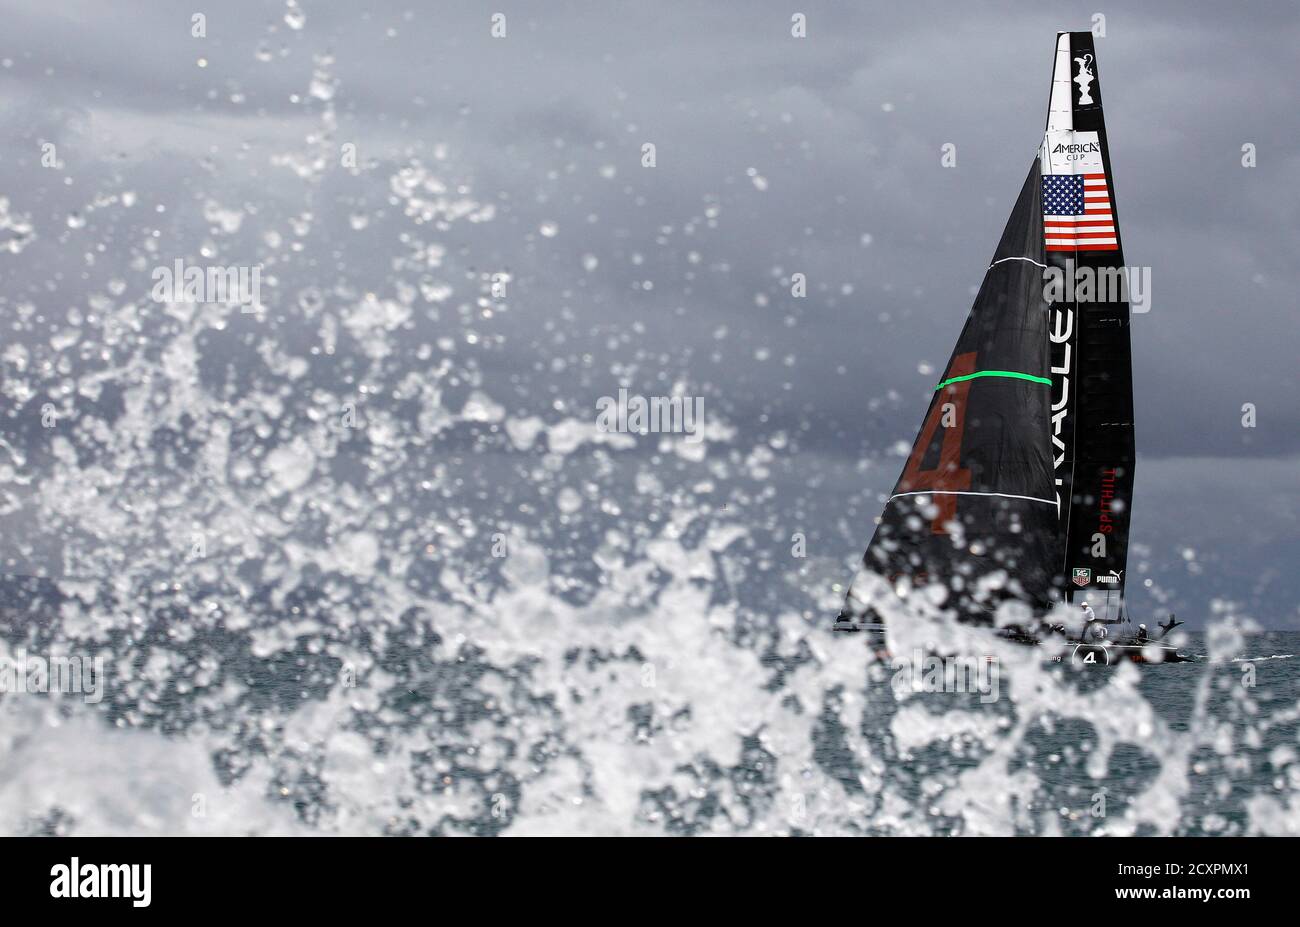 Oracle Racing Team Spithill of the U.S. compete with their multihulls during the America's Cup World Series regatta in Naples April 15, 2012. REUTERS/Alessandro Bianchi (ITALY - Tags: SPORT YACHTING) Stock Photo